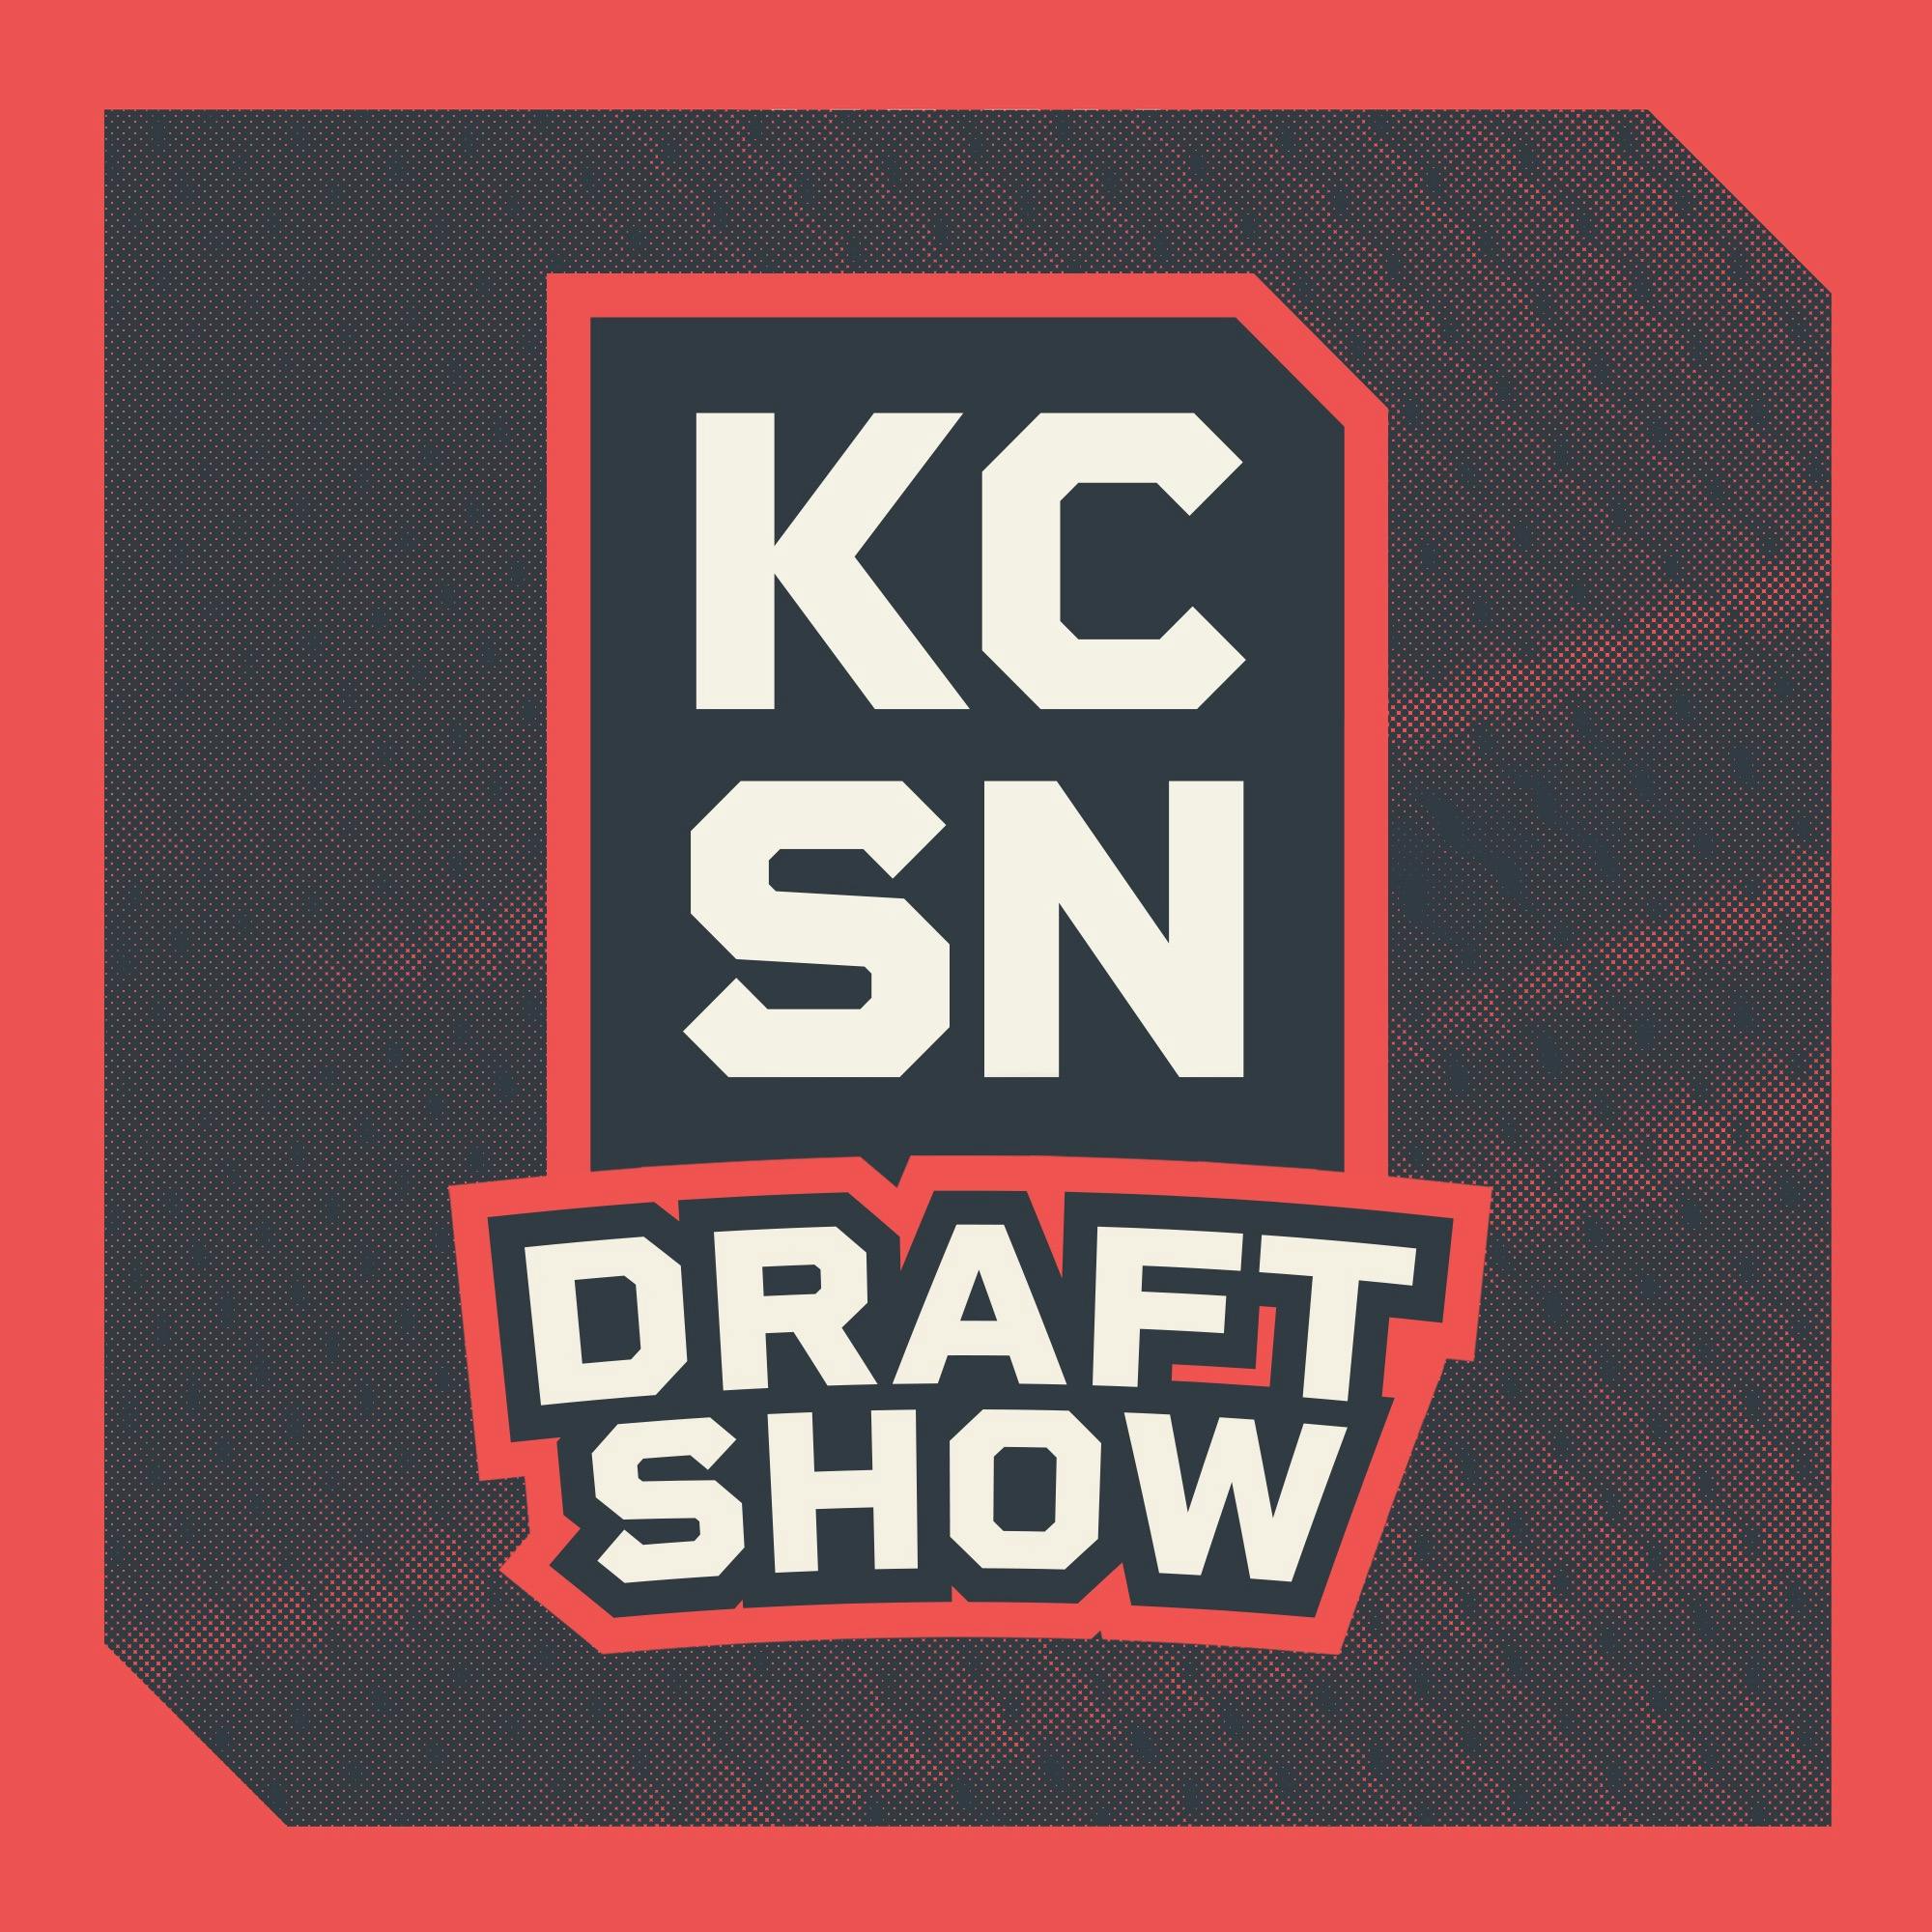 KCSN Draft Show 3/2: The Athletic's Dane Brugler Breaks Down Prospects, Chiefs Biggest Draft Needs